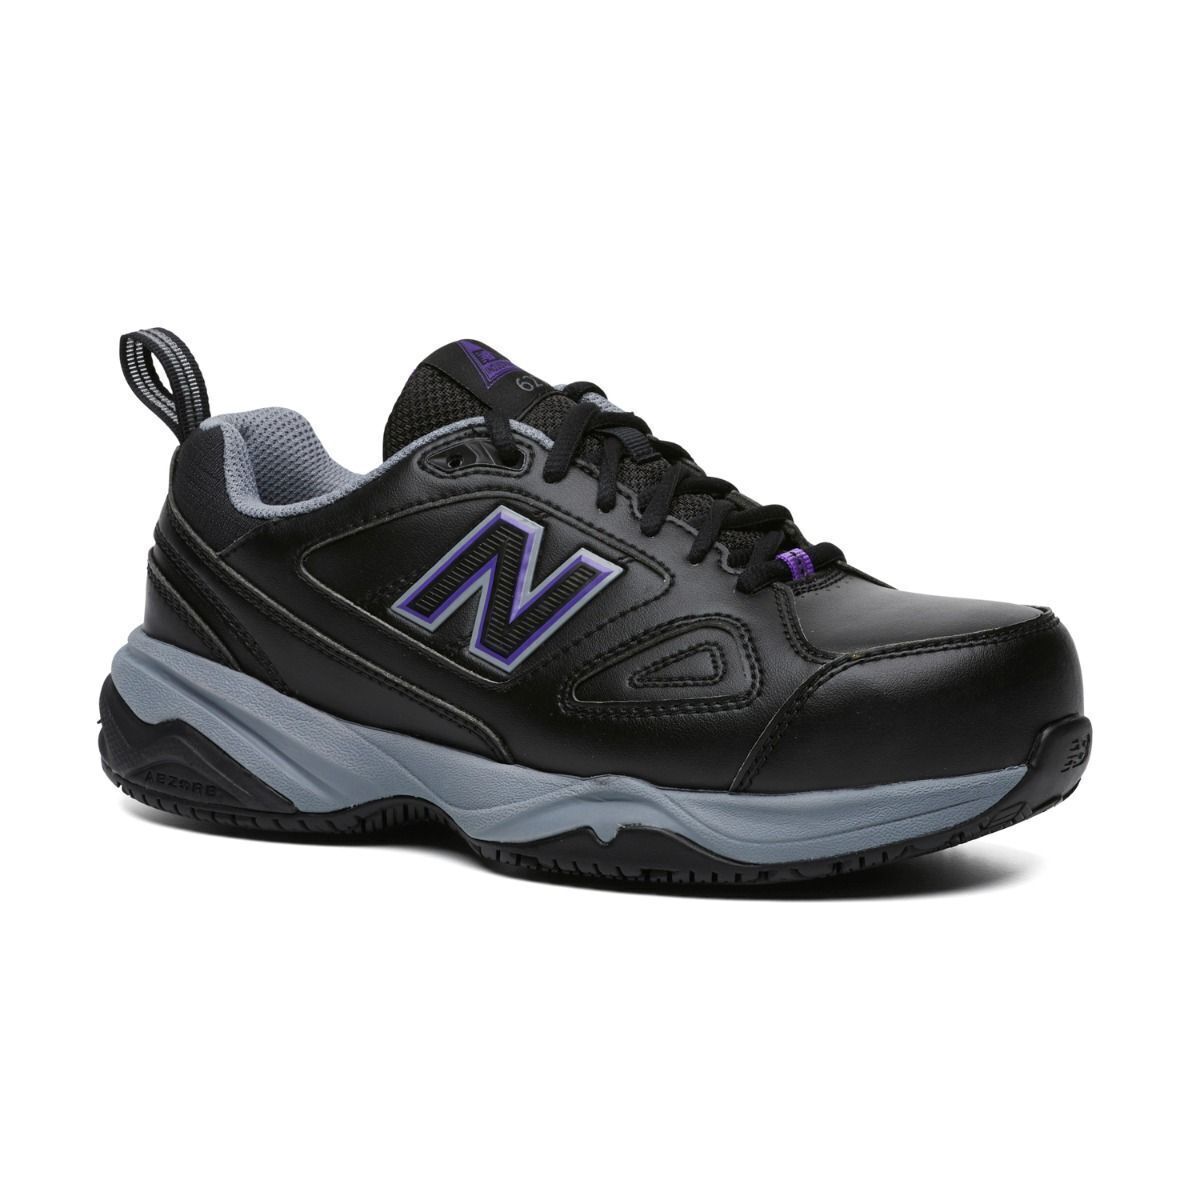 New Balance Women's 627 Steel Cap Toe Safety Shoes Runners Work - Black ...